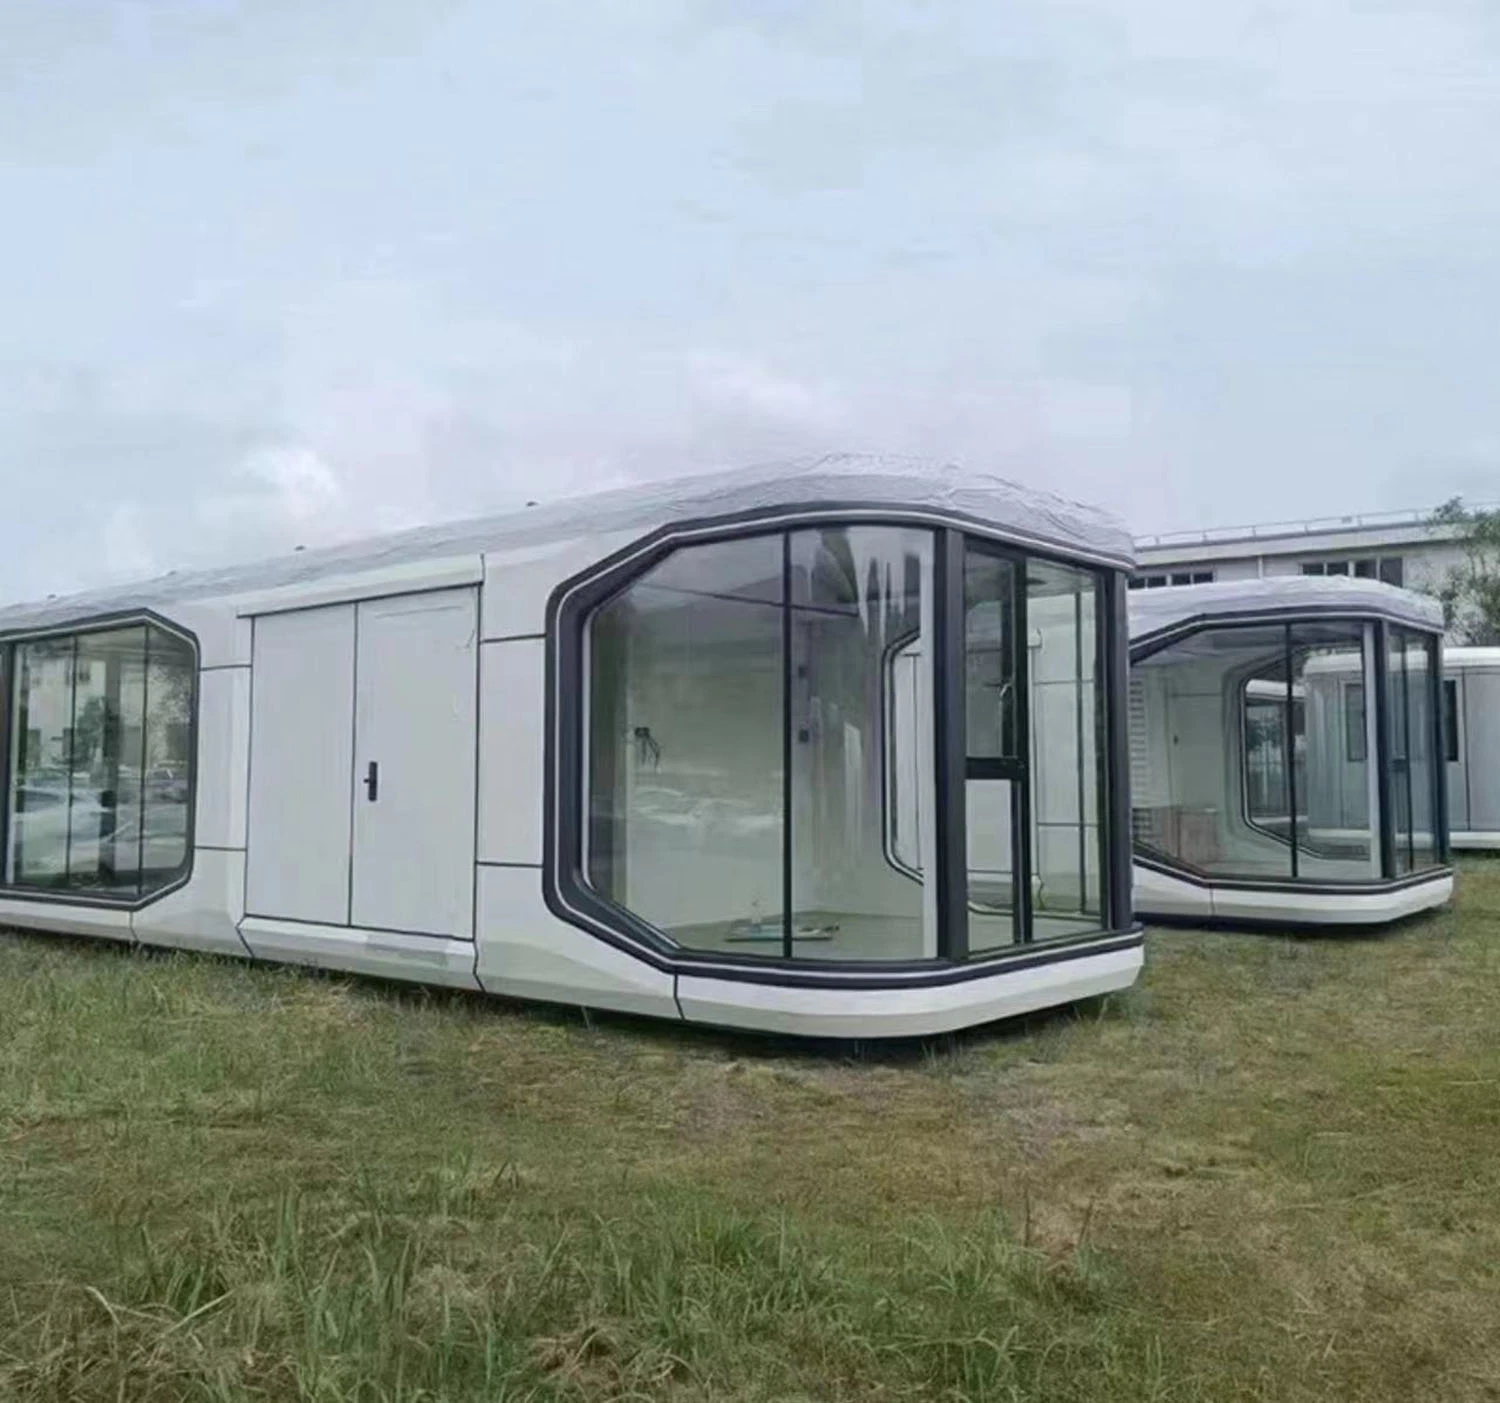 Future Cabin Module Integrated Residential Camping Mobile Space Cabin of Culture and Tourism Mobile Homestay Hotel

Future Module de Cabine Intégrée Résidentielle Camping Mobile Espace Cabine de Culture et de Tourisme Mobile Maison d'Hôtes Hôtel